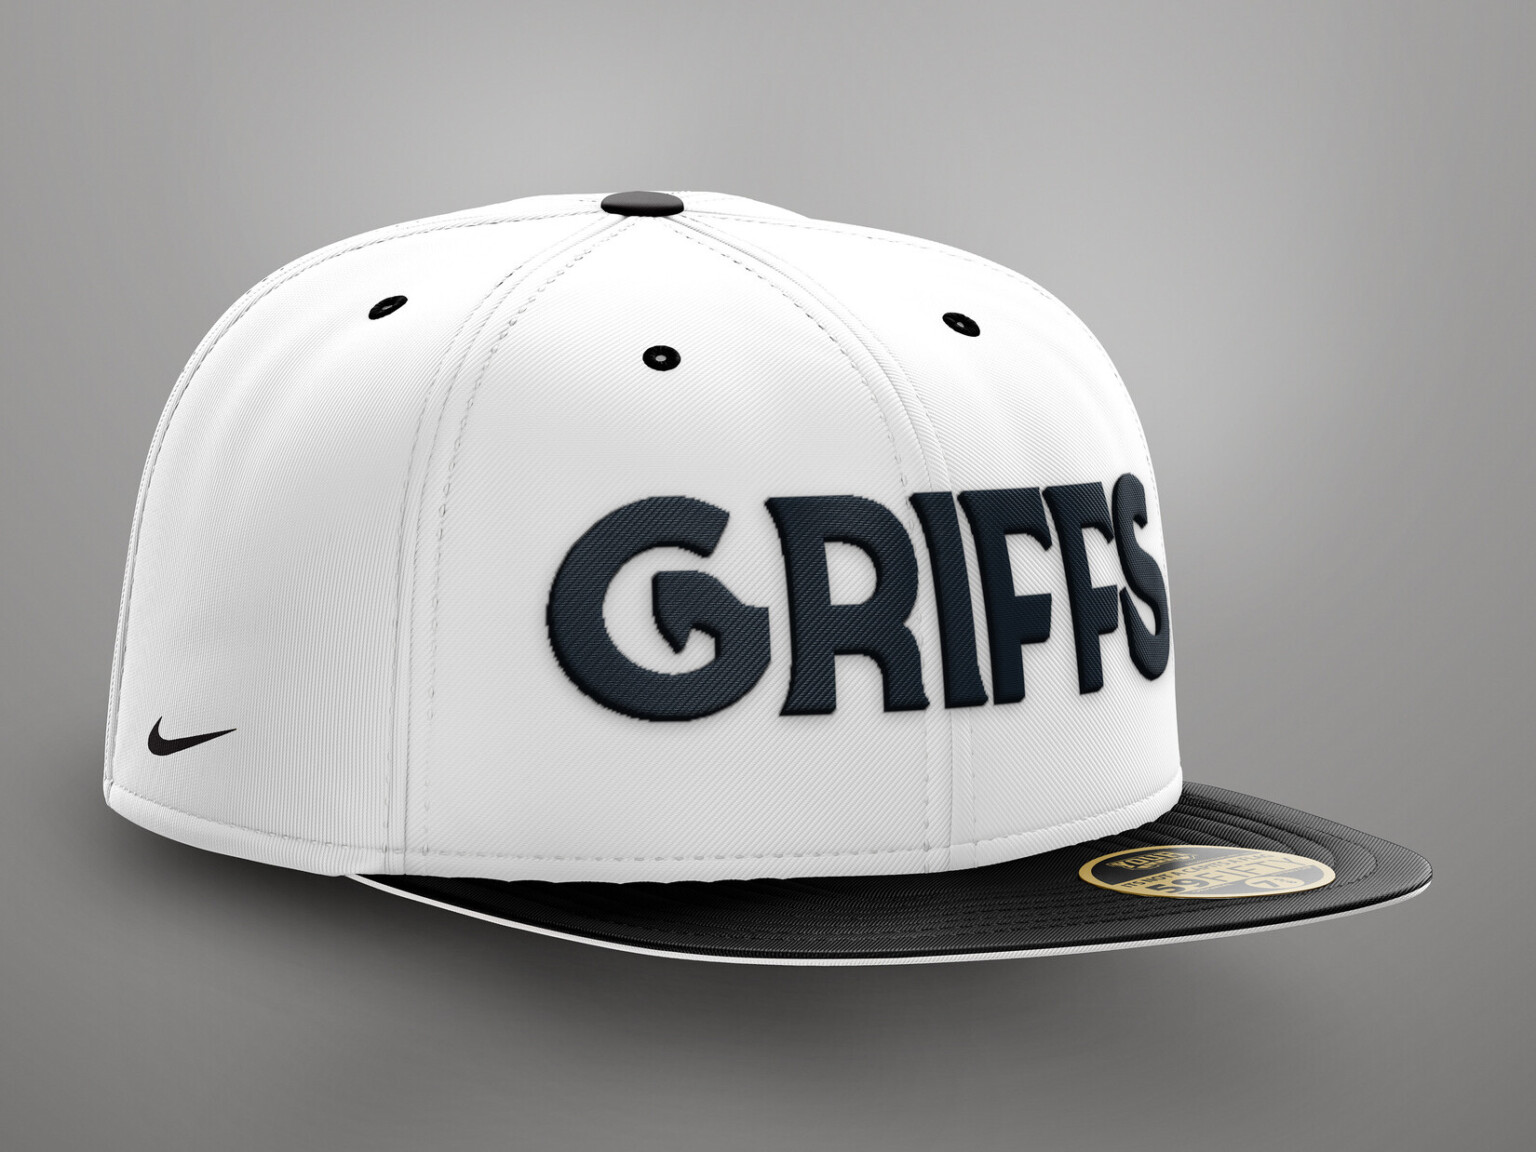 White hat with black baseball cap brim, Griffins written across the front in black